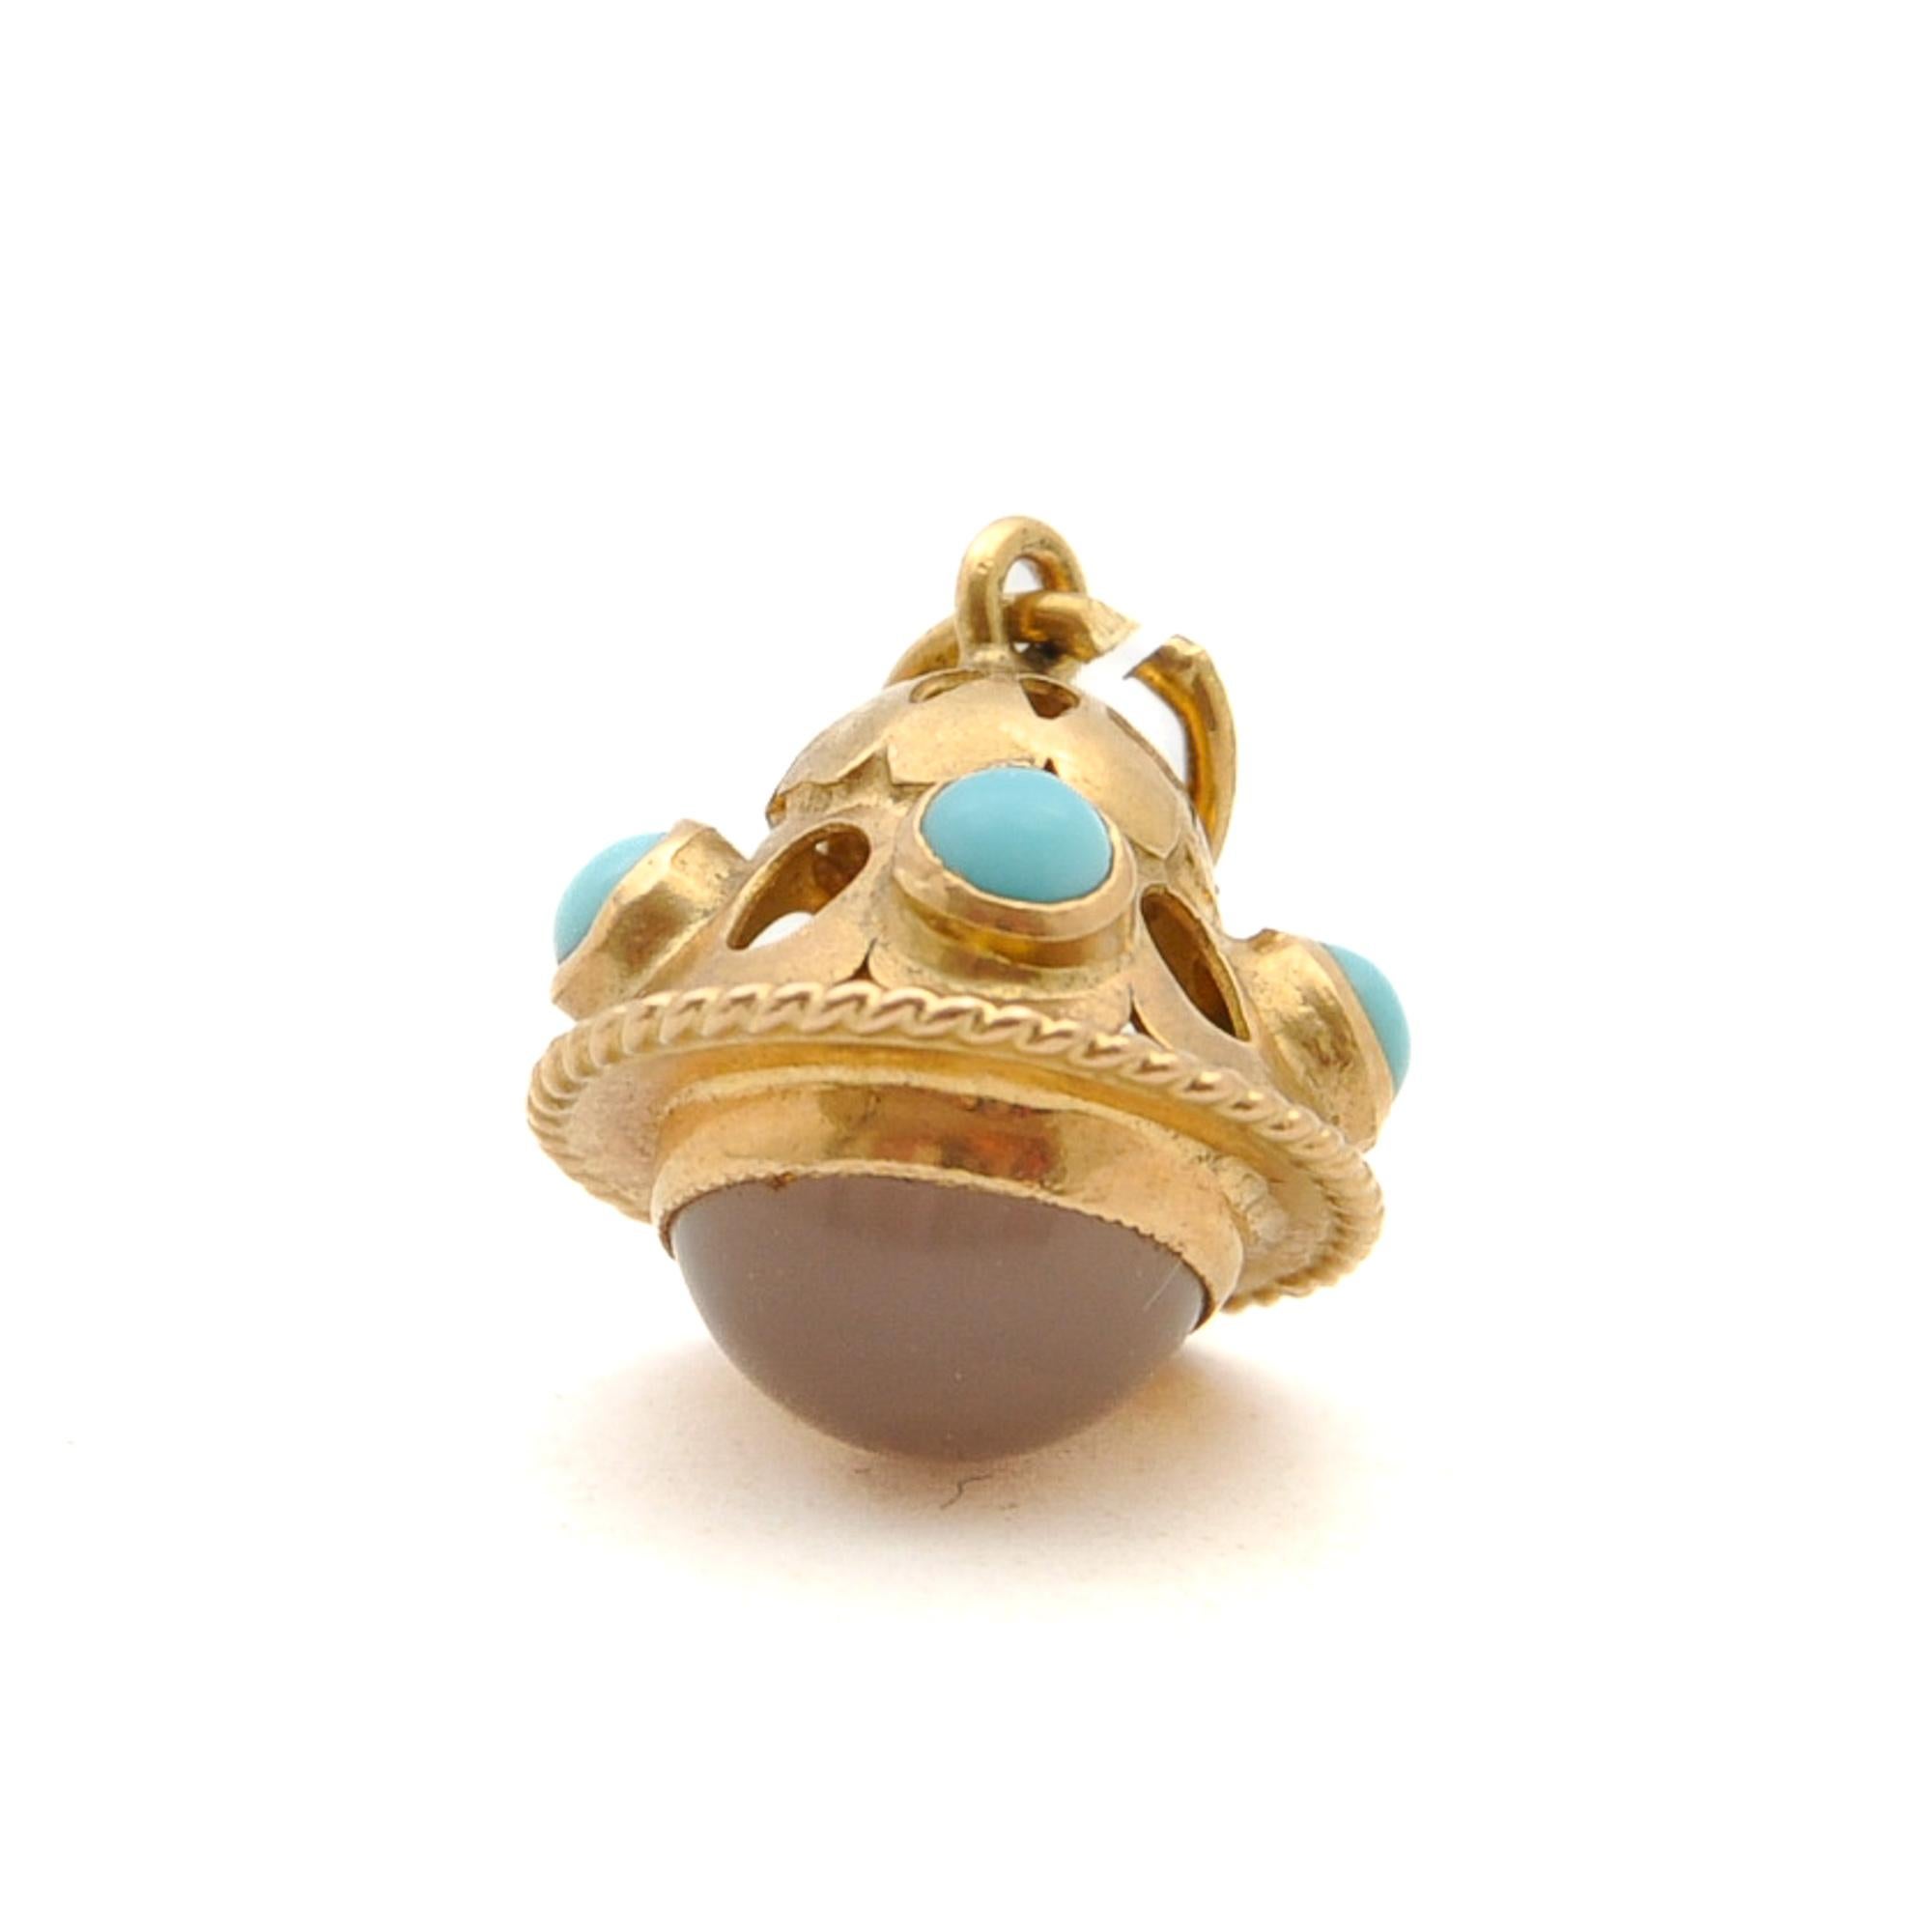 Vintage 18K Gold Turquoise and Moonstone Charm Pendant For Sale 3